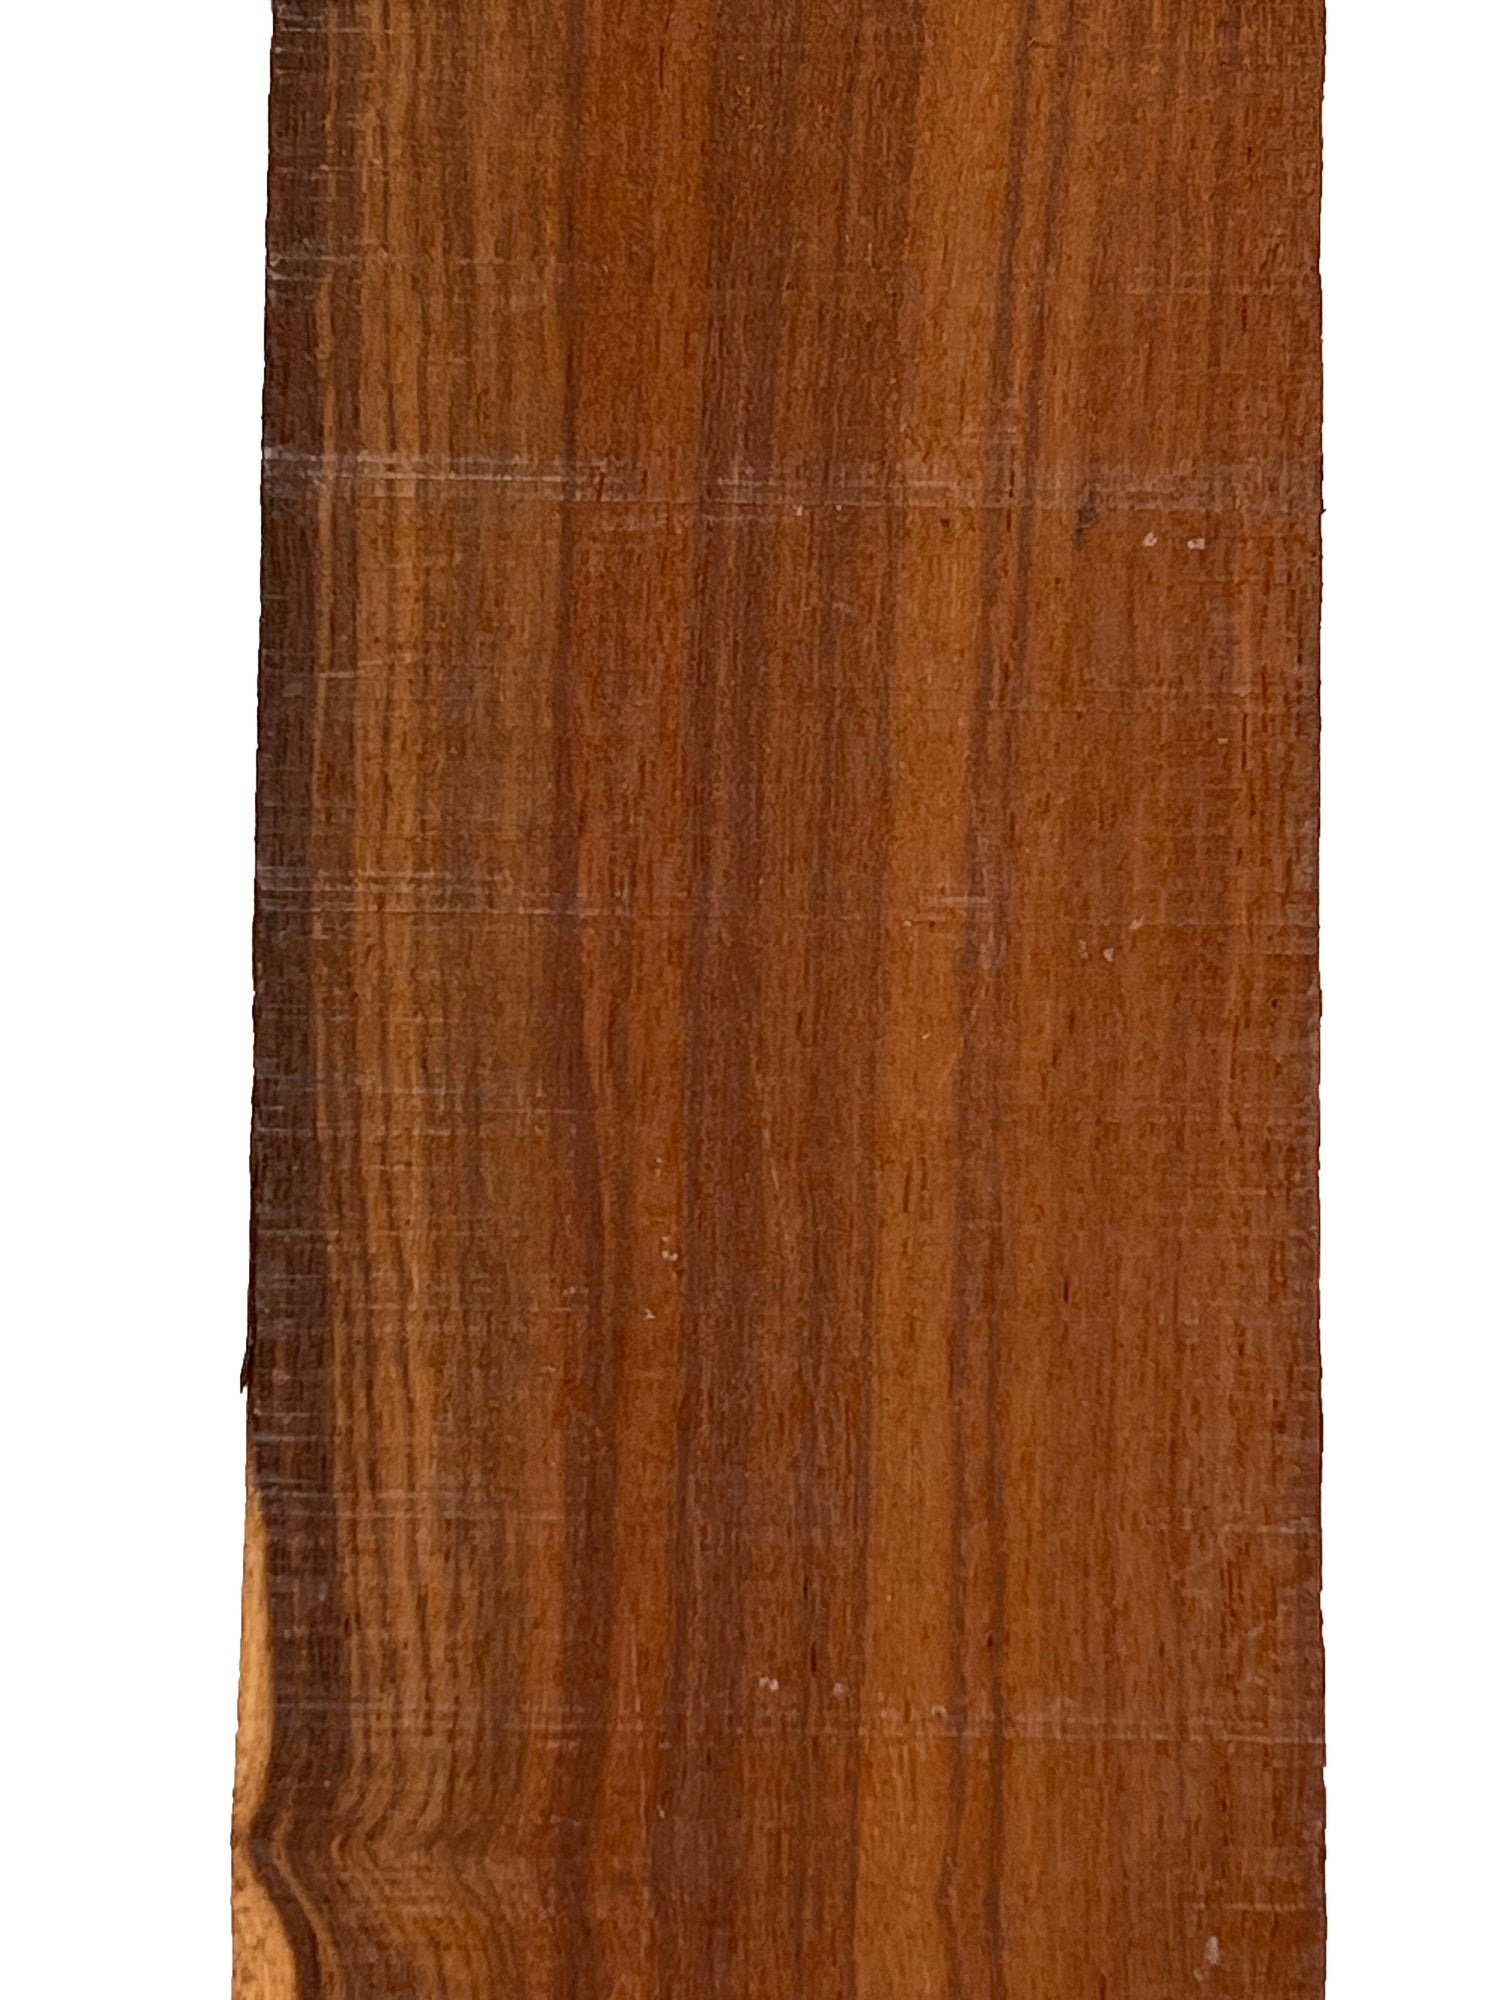 3 Pack, Mexican Granadillo Guitar Fingerboard Blanks 21&quot; x 2-3/4&quot; x 3/8&quot; - Exotic Wood Zone - Buy online Across USA 